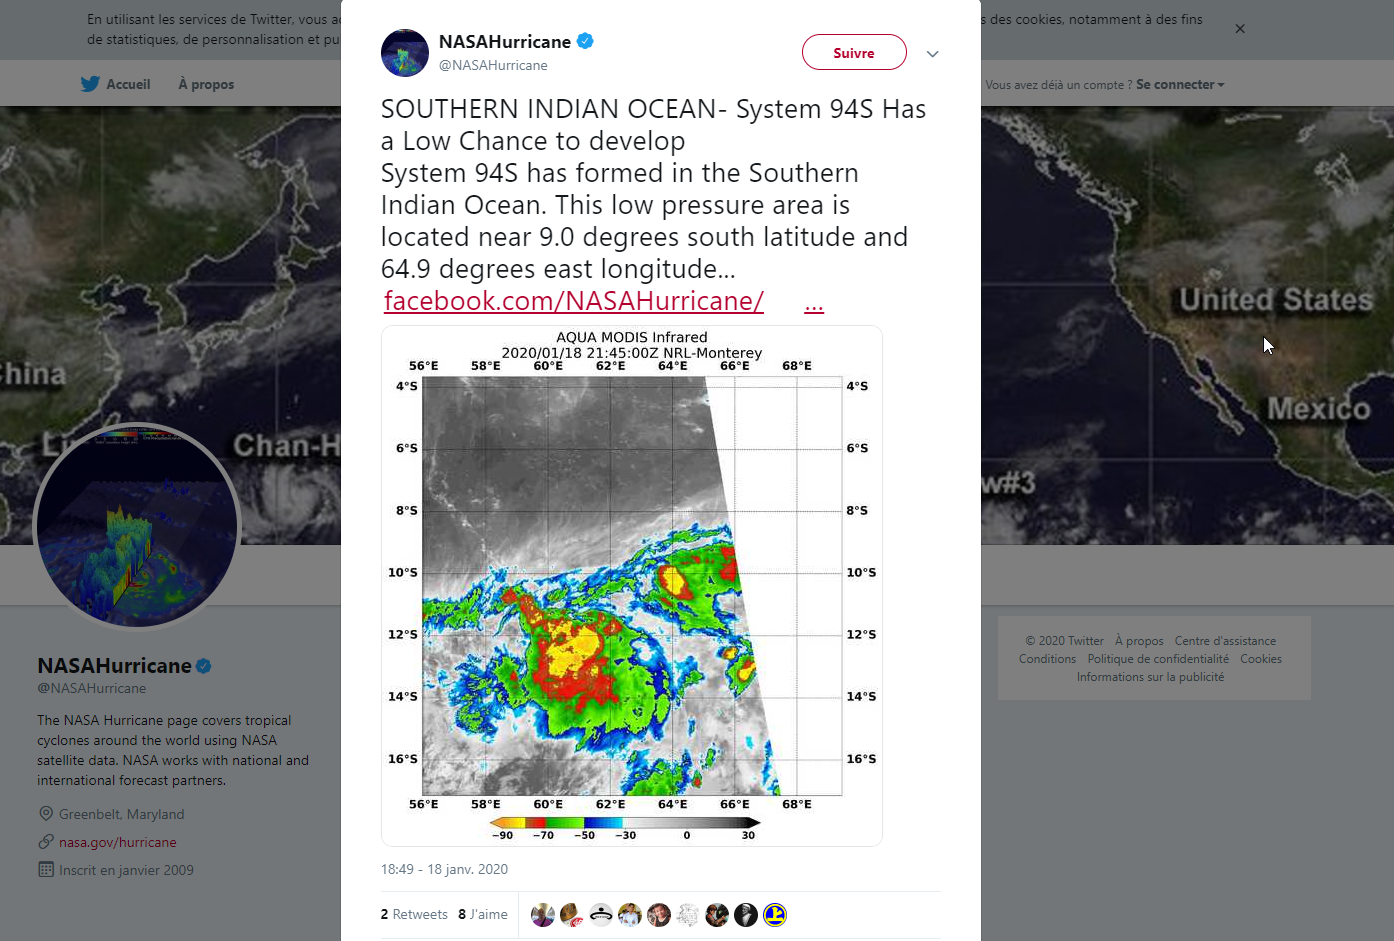 https://www.meteo-reunion.com/le_forum/2020_01_19_18_51_07_NASAHurricane_sur_Twitter_SOUTHERN_INDIAN_OCEAN_System_94S_Has_a_Low_Chance_.png